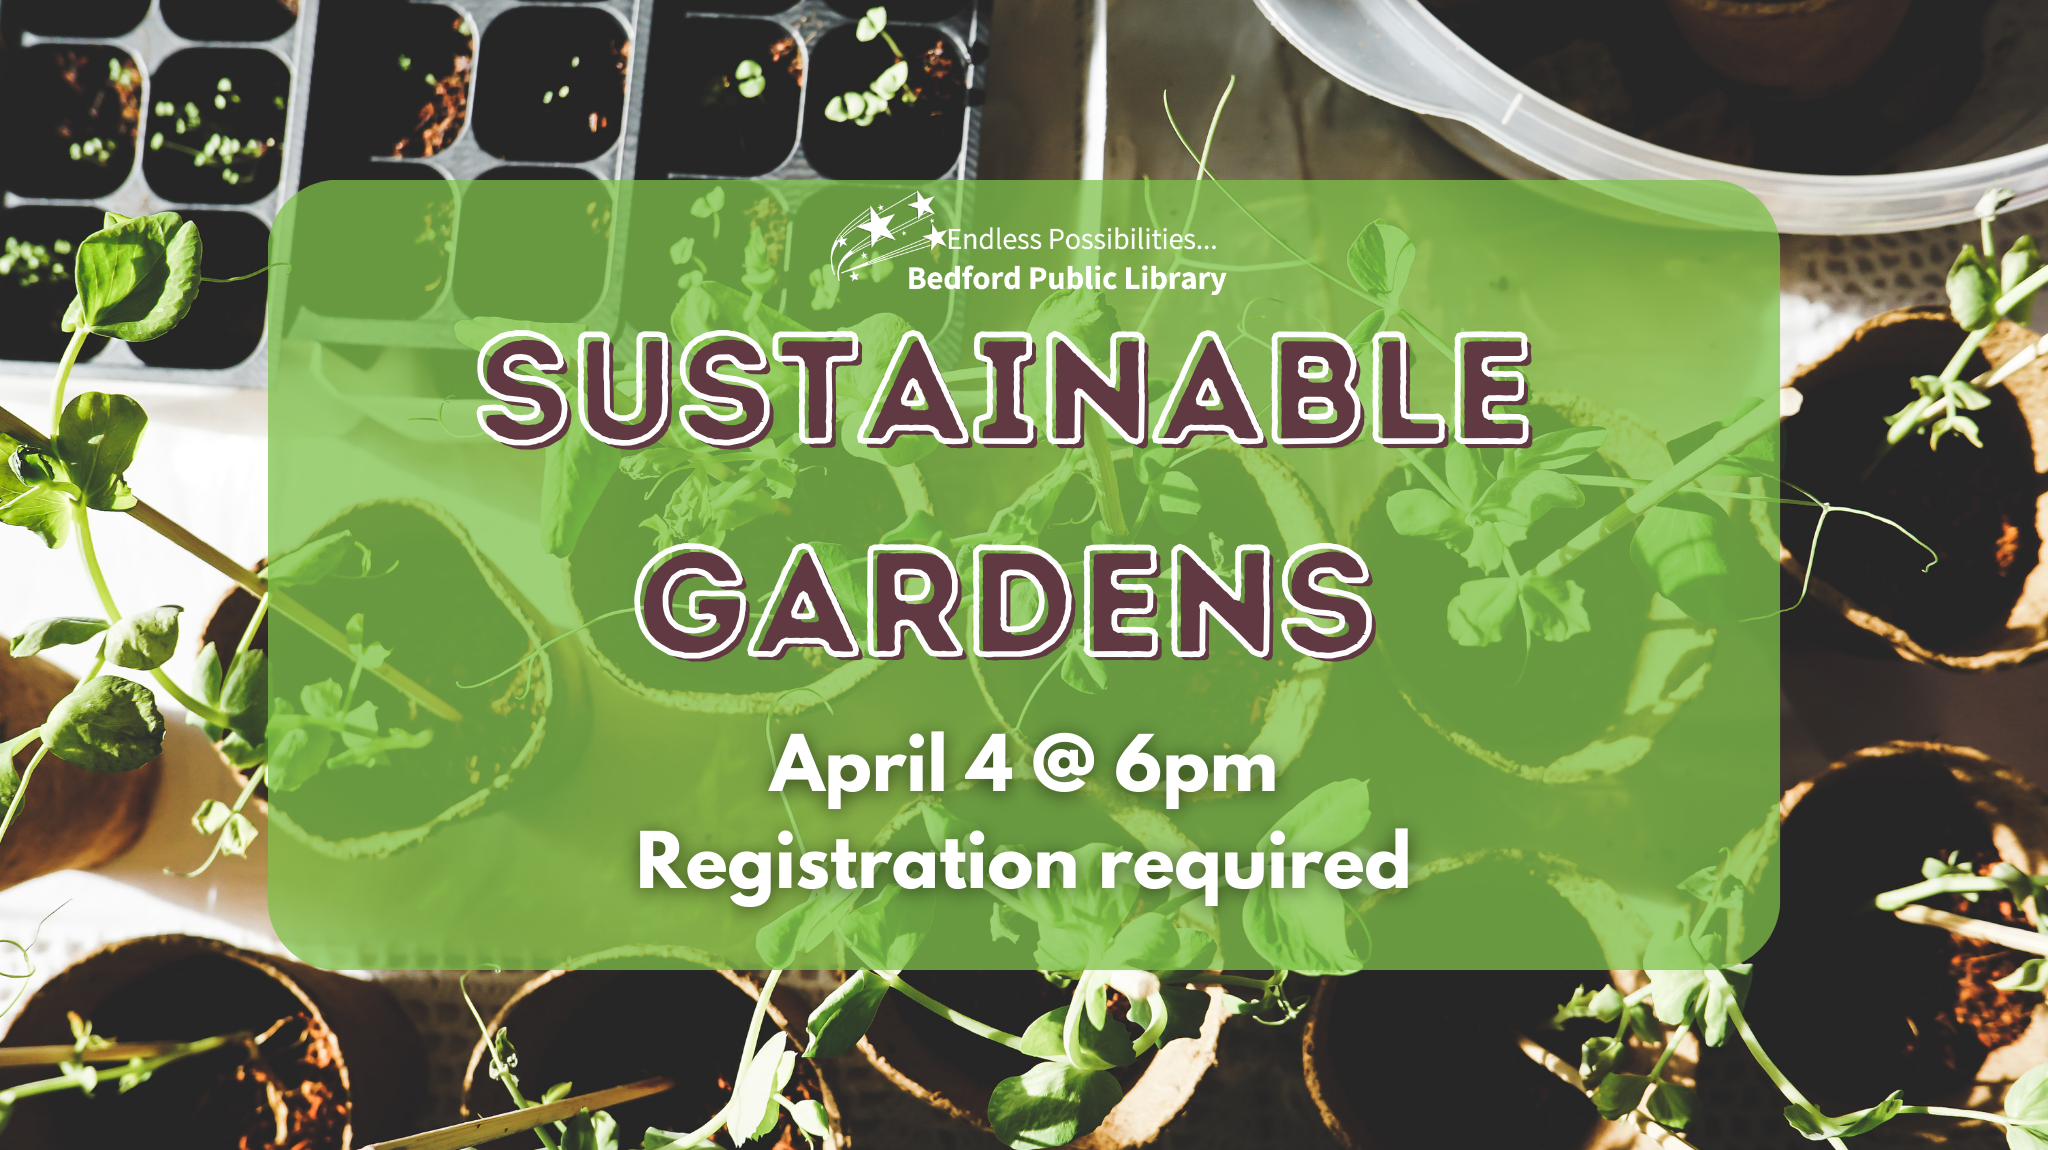 Sustainable Gardens on April 4 at 6pm